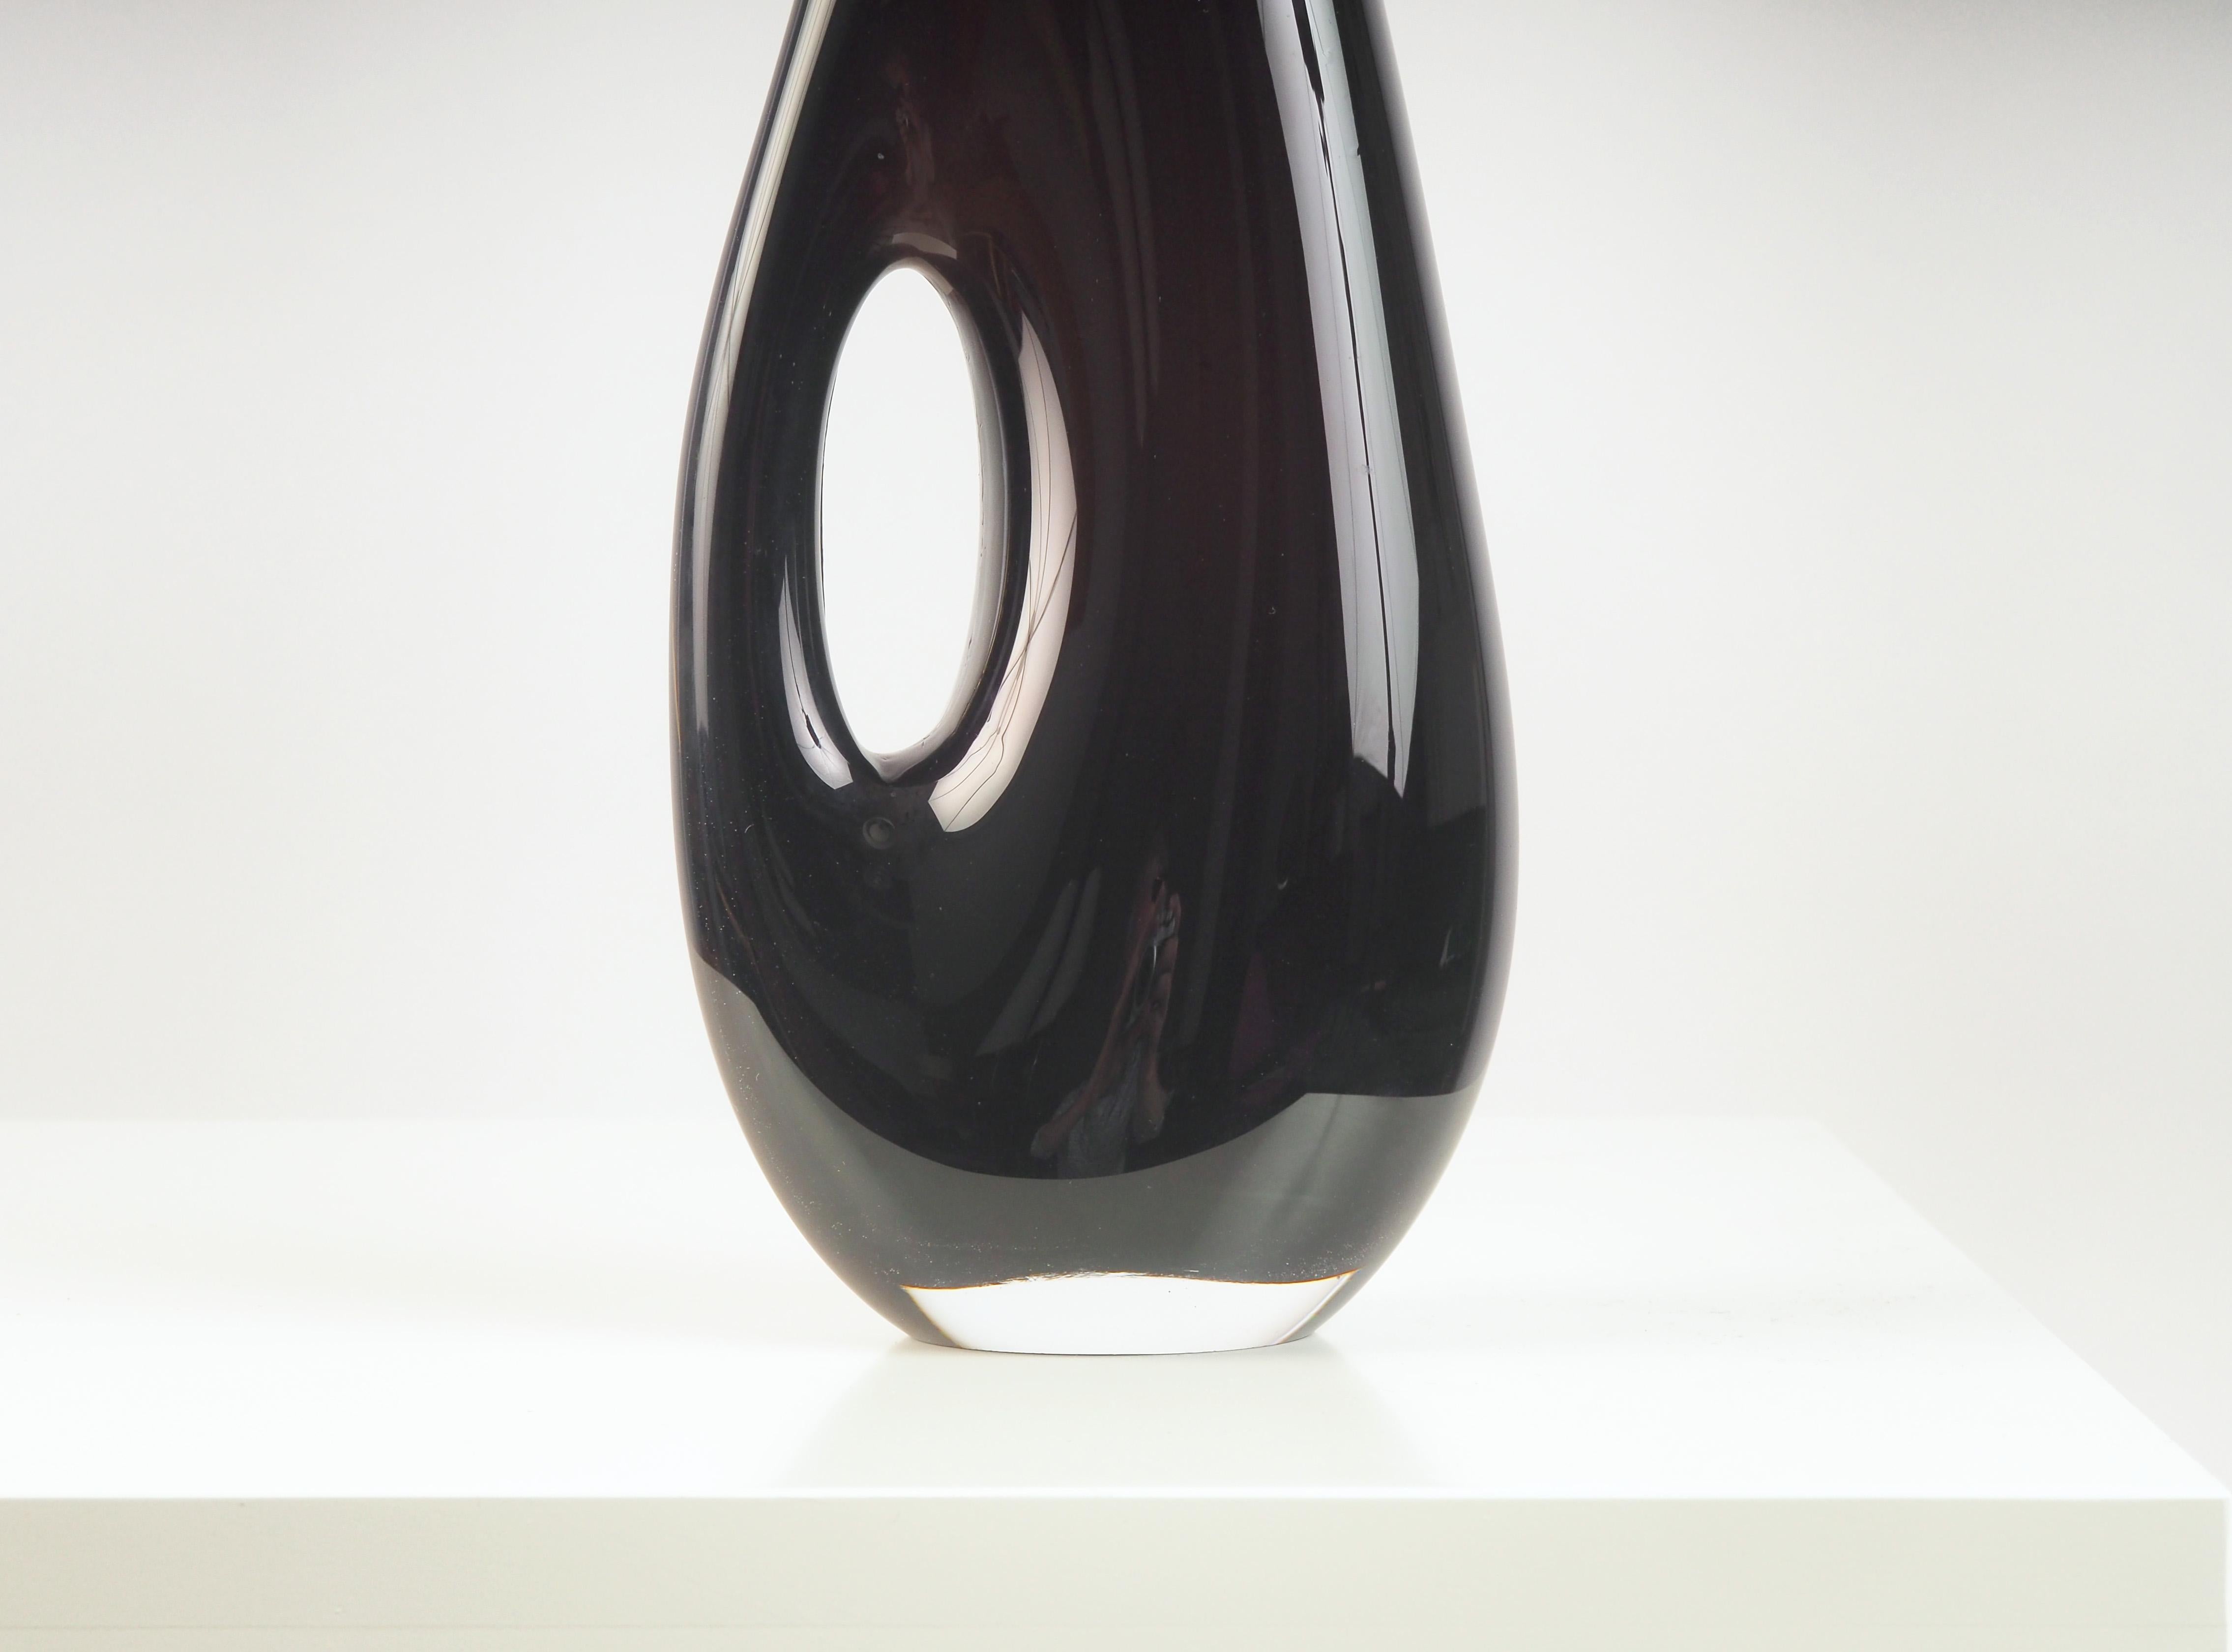 Rare black vase by Vicke Lindstrand made at Kosta Glasbruk during the 1950s. The vase is made in sommerso technique with a large asymmetric hole through the body of the vase.